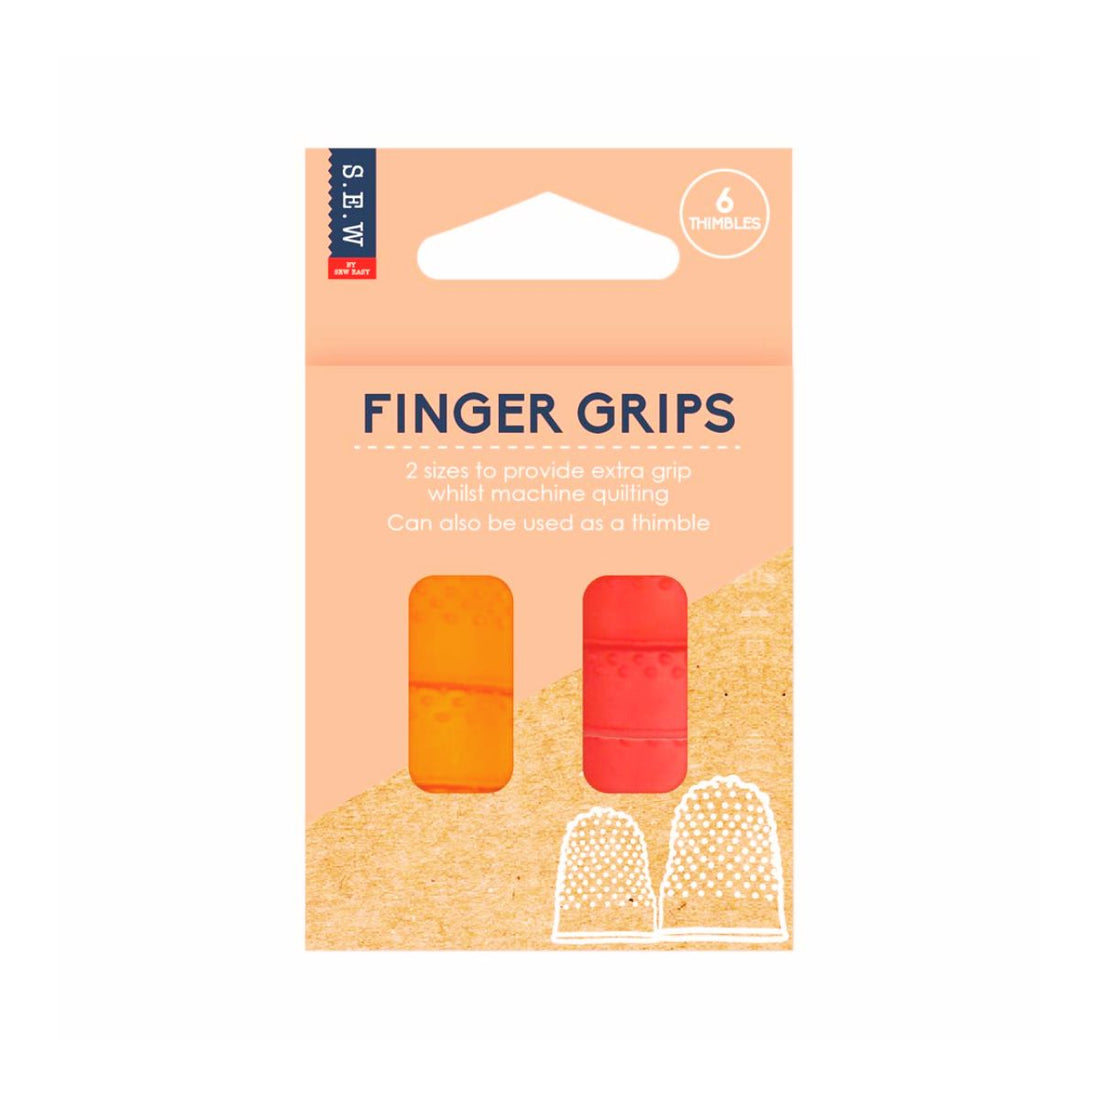 Sew Easy finger grips for quilting and embroidery